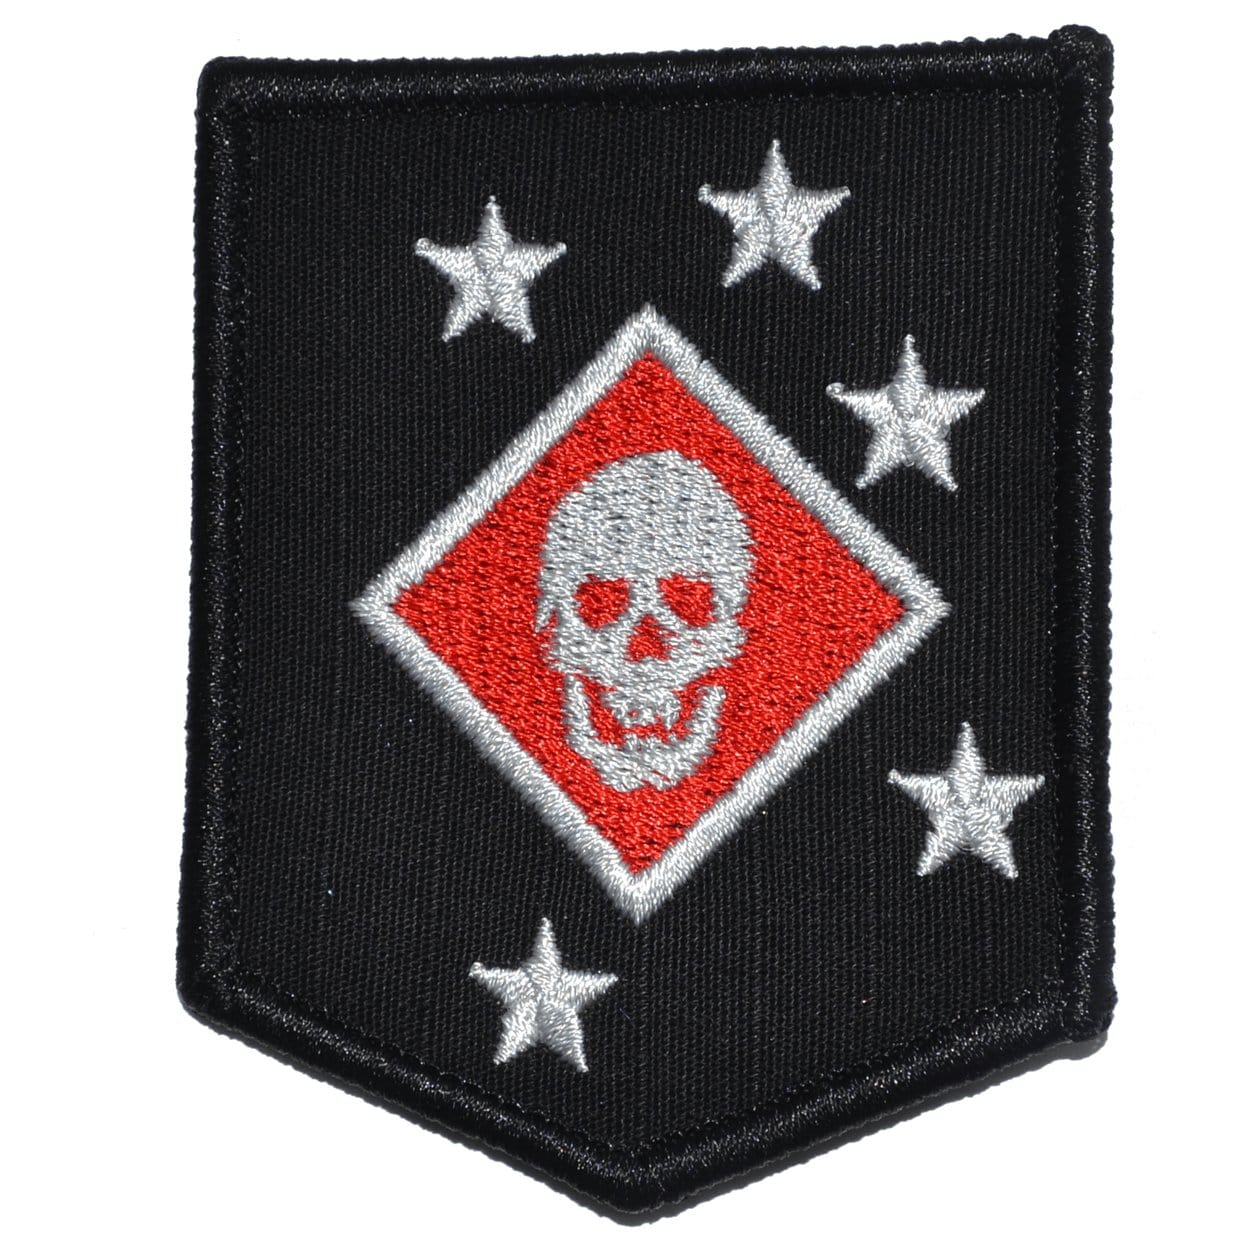 Tactical Gear Junkie Patches Black Marine Raider Battalion Thick Jaw Patch MarSOC - Shield Patch